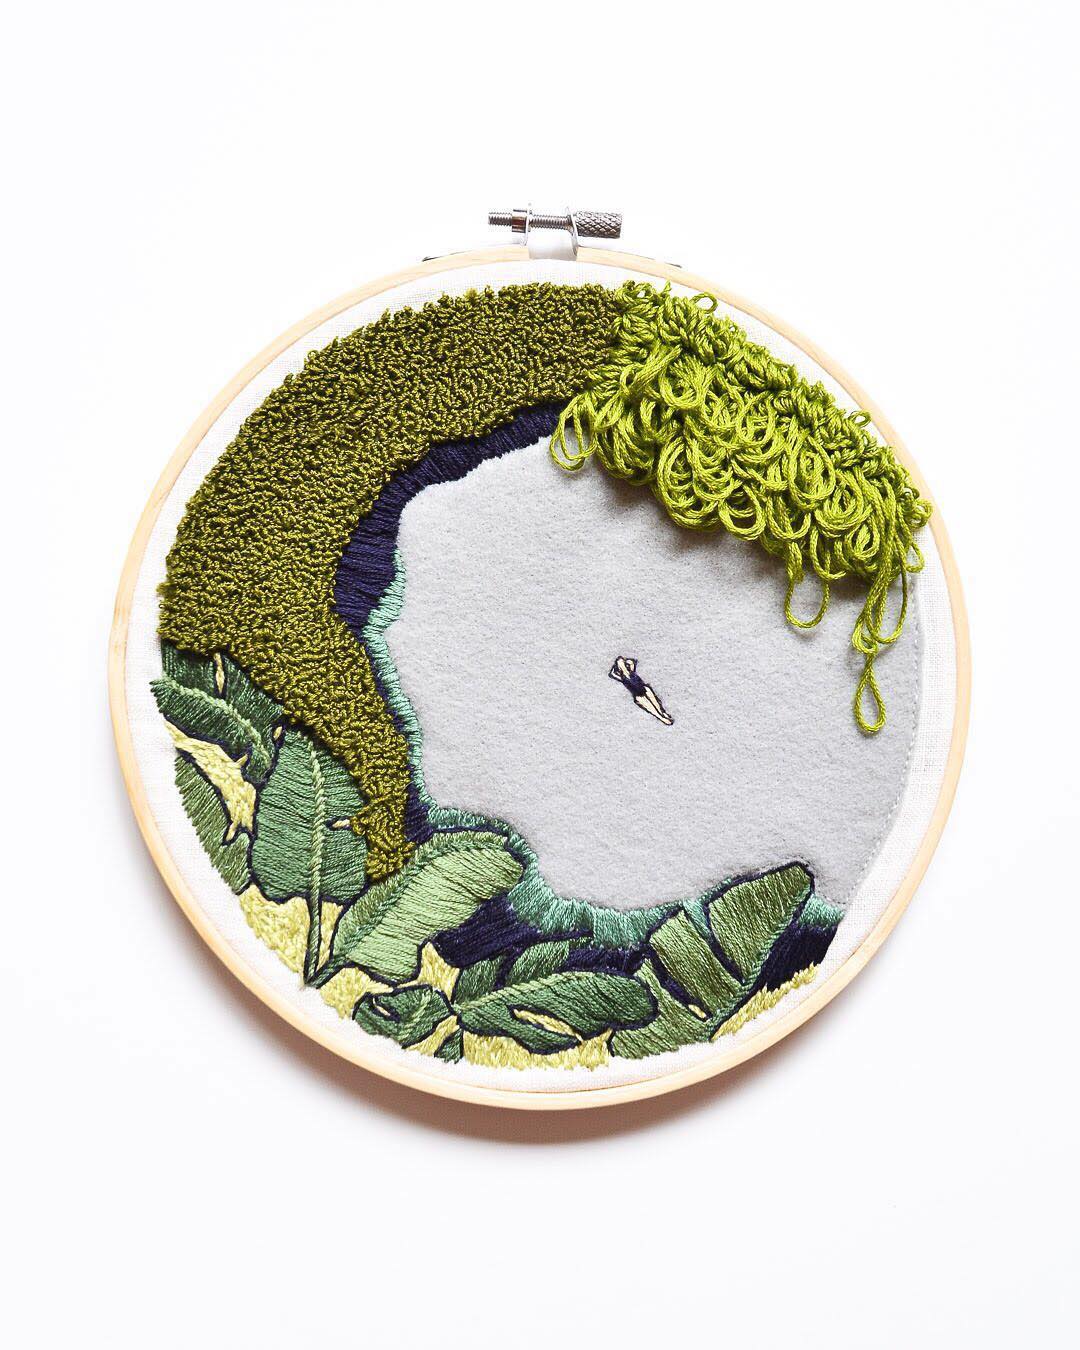 Hand embroidered landscapes by Fenny Suter